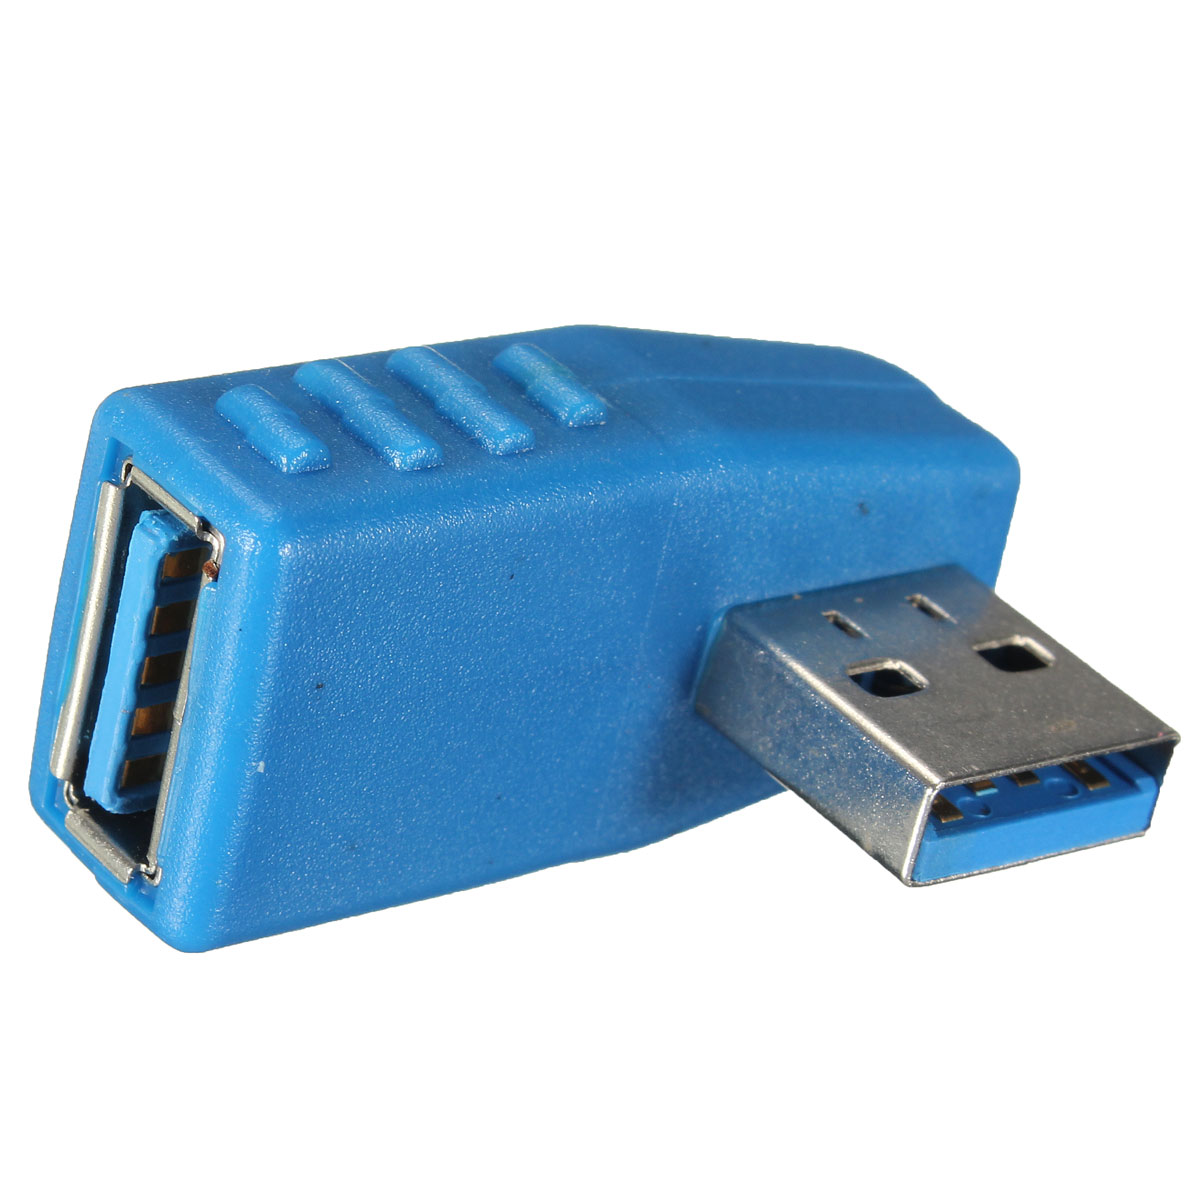 90-Degree-Right-Angled-USB-30-Male-to-USB-30-Female-Adapter-Converter-USB-Connector-1202909